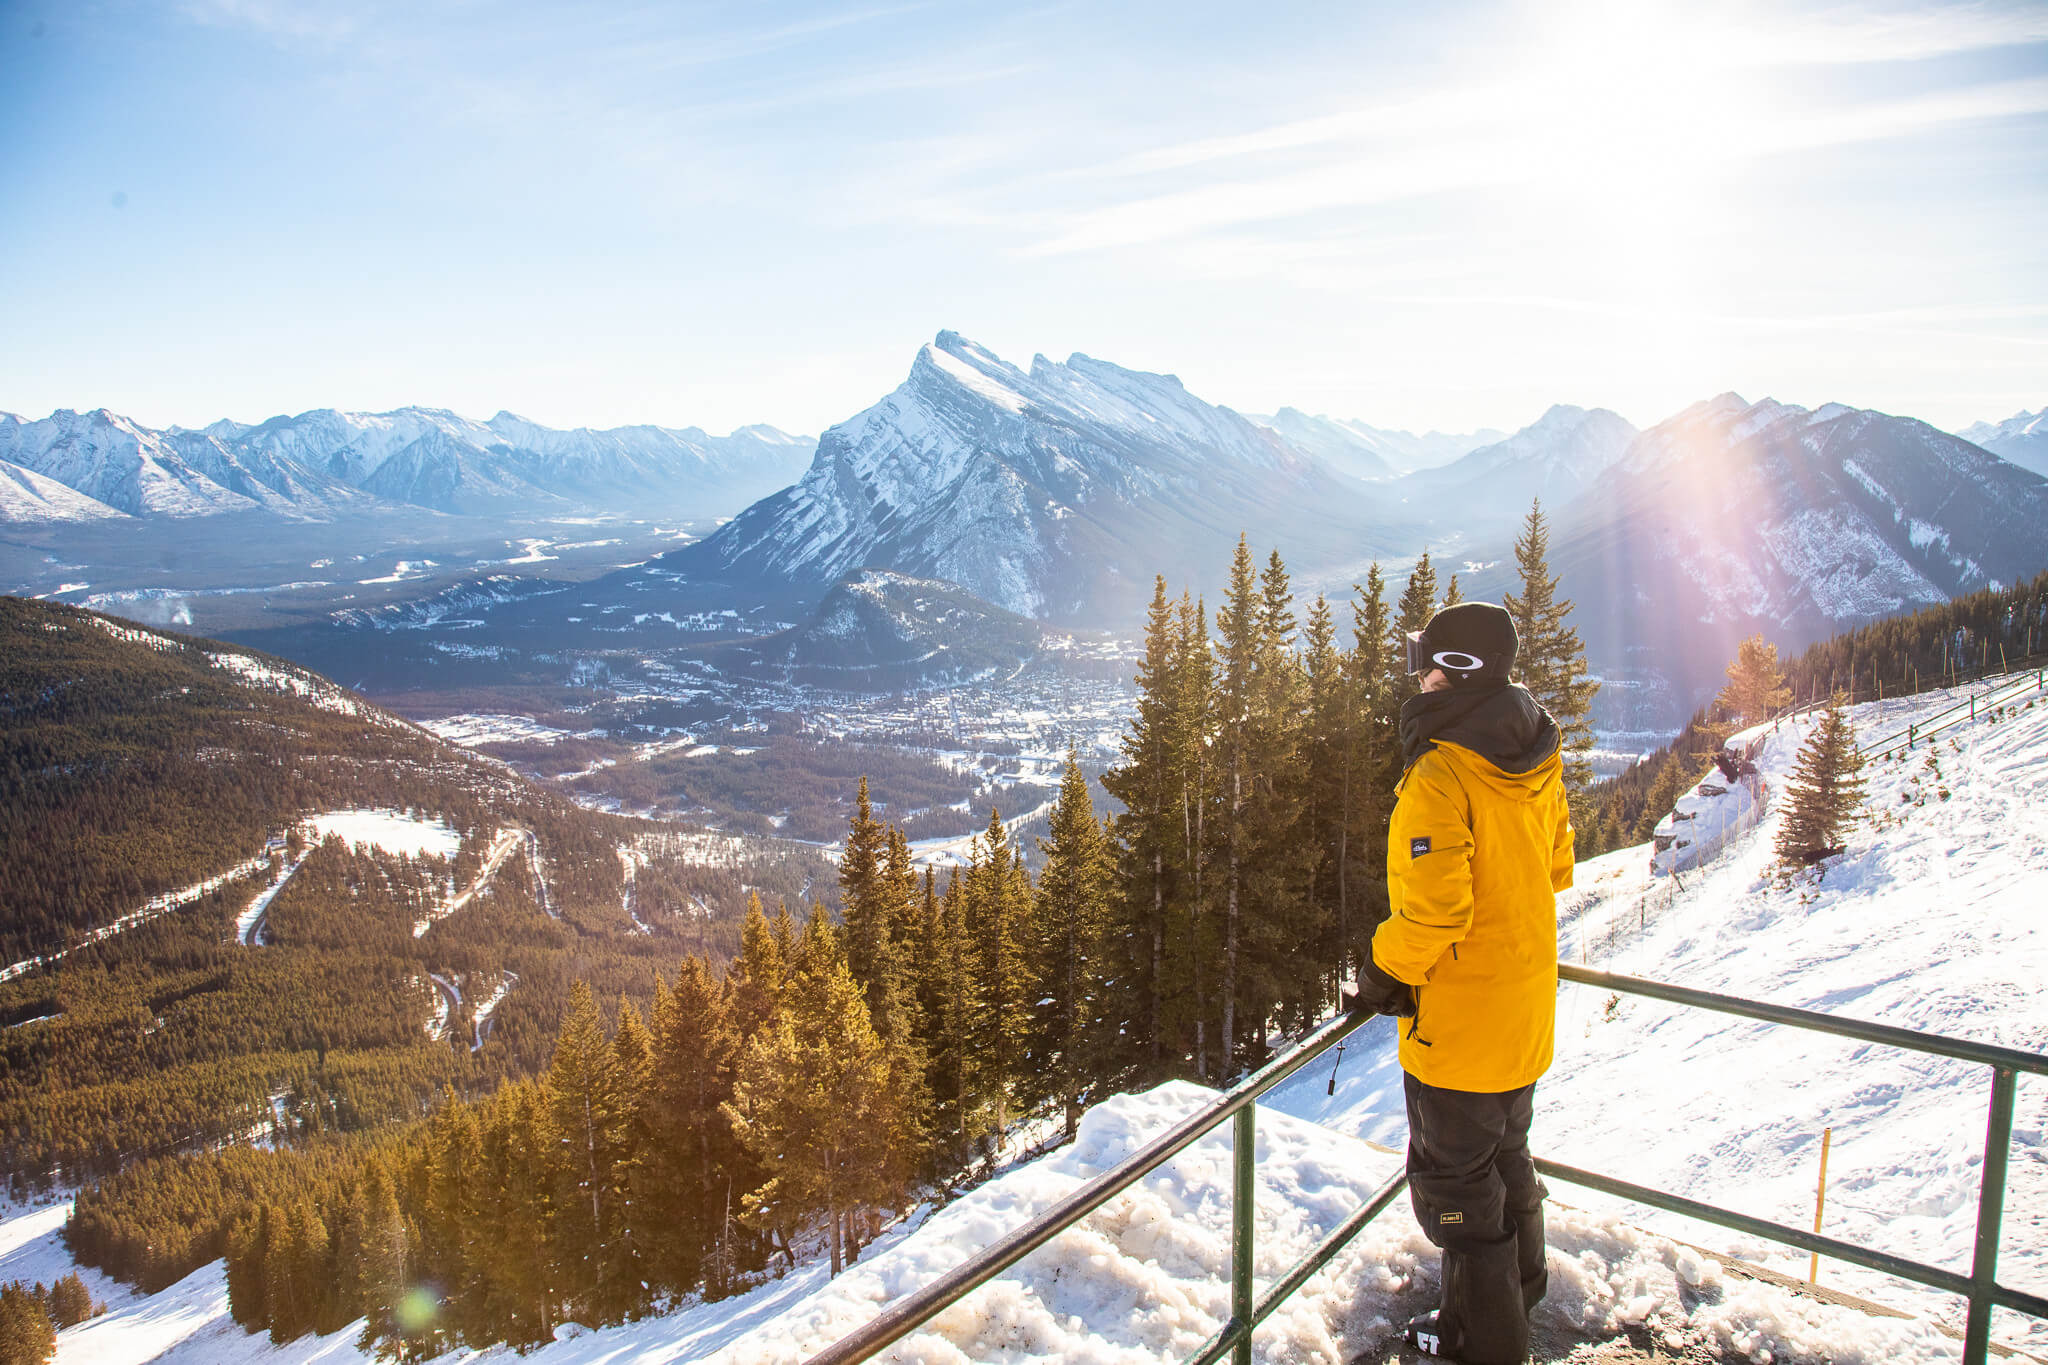 Man taking in the views of Banff National Park from Nt. Norquay, a beautiful selfie spot